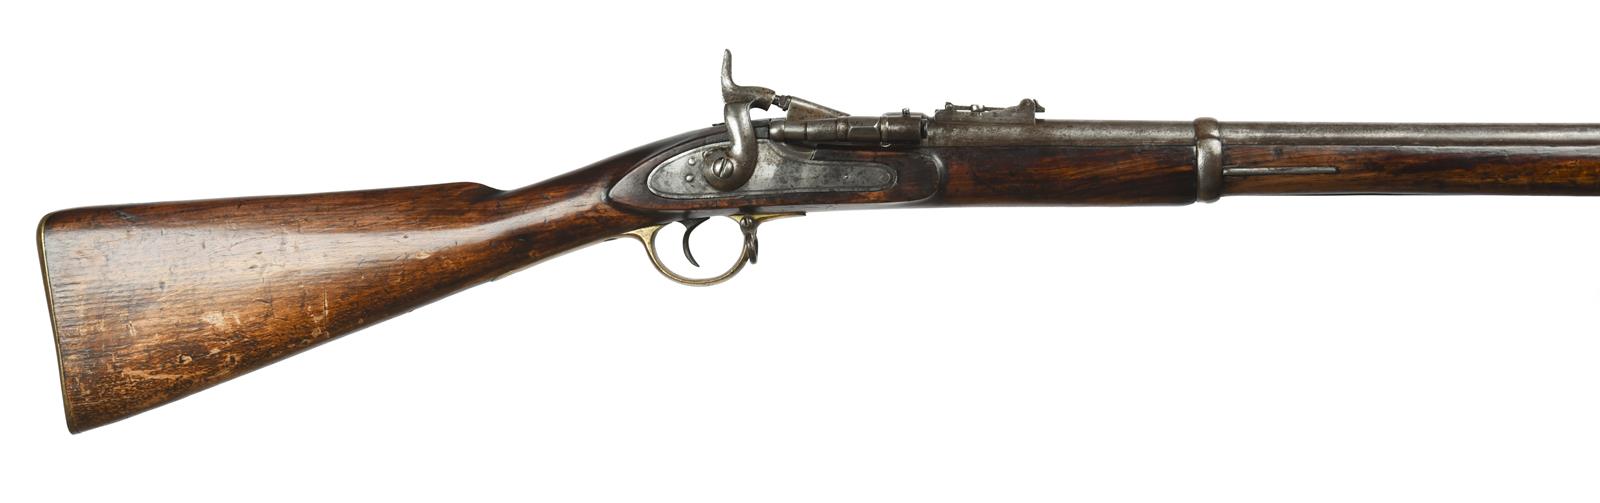 A .577 Nepalese Snider service rifle, 36.5 in. barrel, back sight with range marked in Nepali